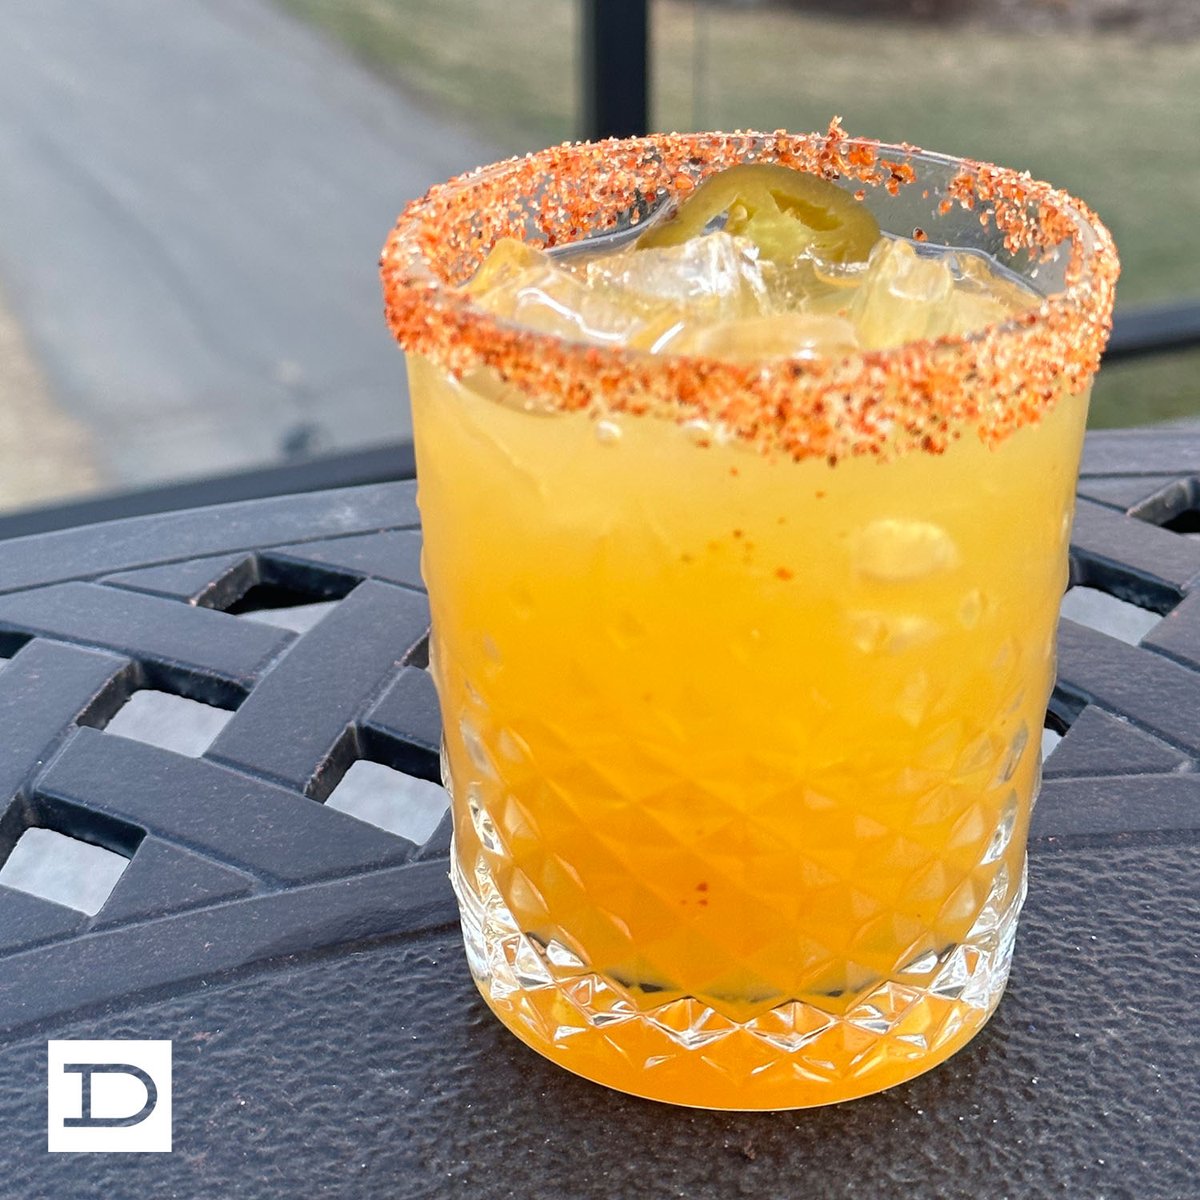 Add a little but of spice ✨.....with the Spicy Passion Fruit Margarita!

Order it off the cocktail menu!

#Margarita #Spicy #PassionFruit #YEGdrinks #YEG